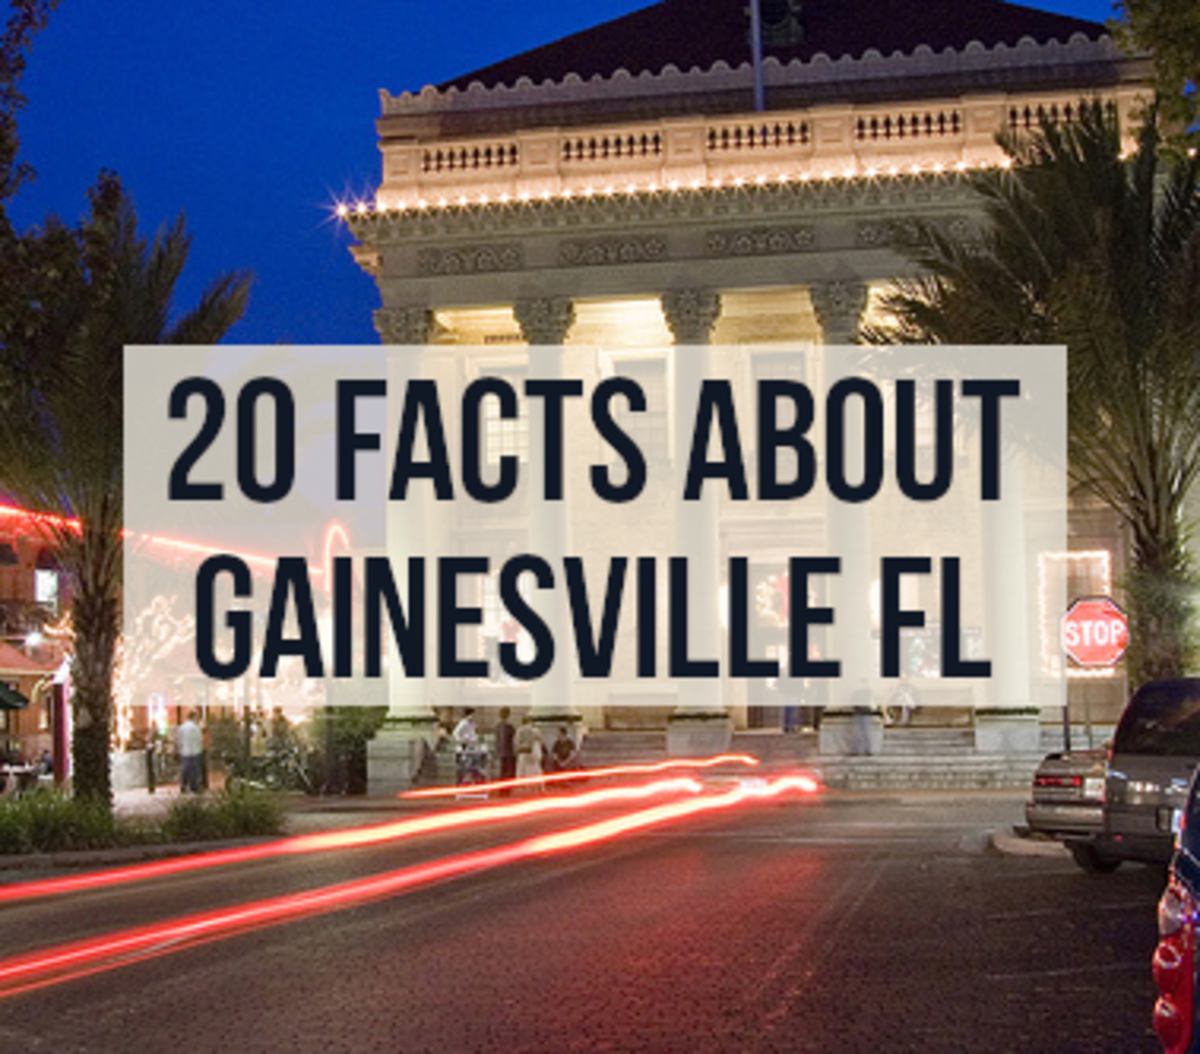 For 20 Gainesville facts, please read on...